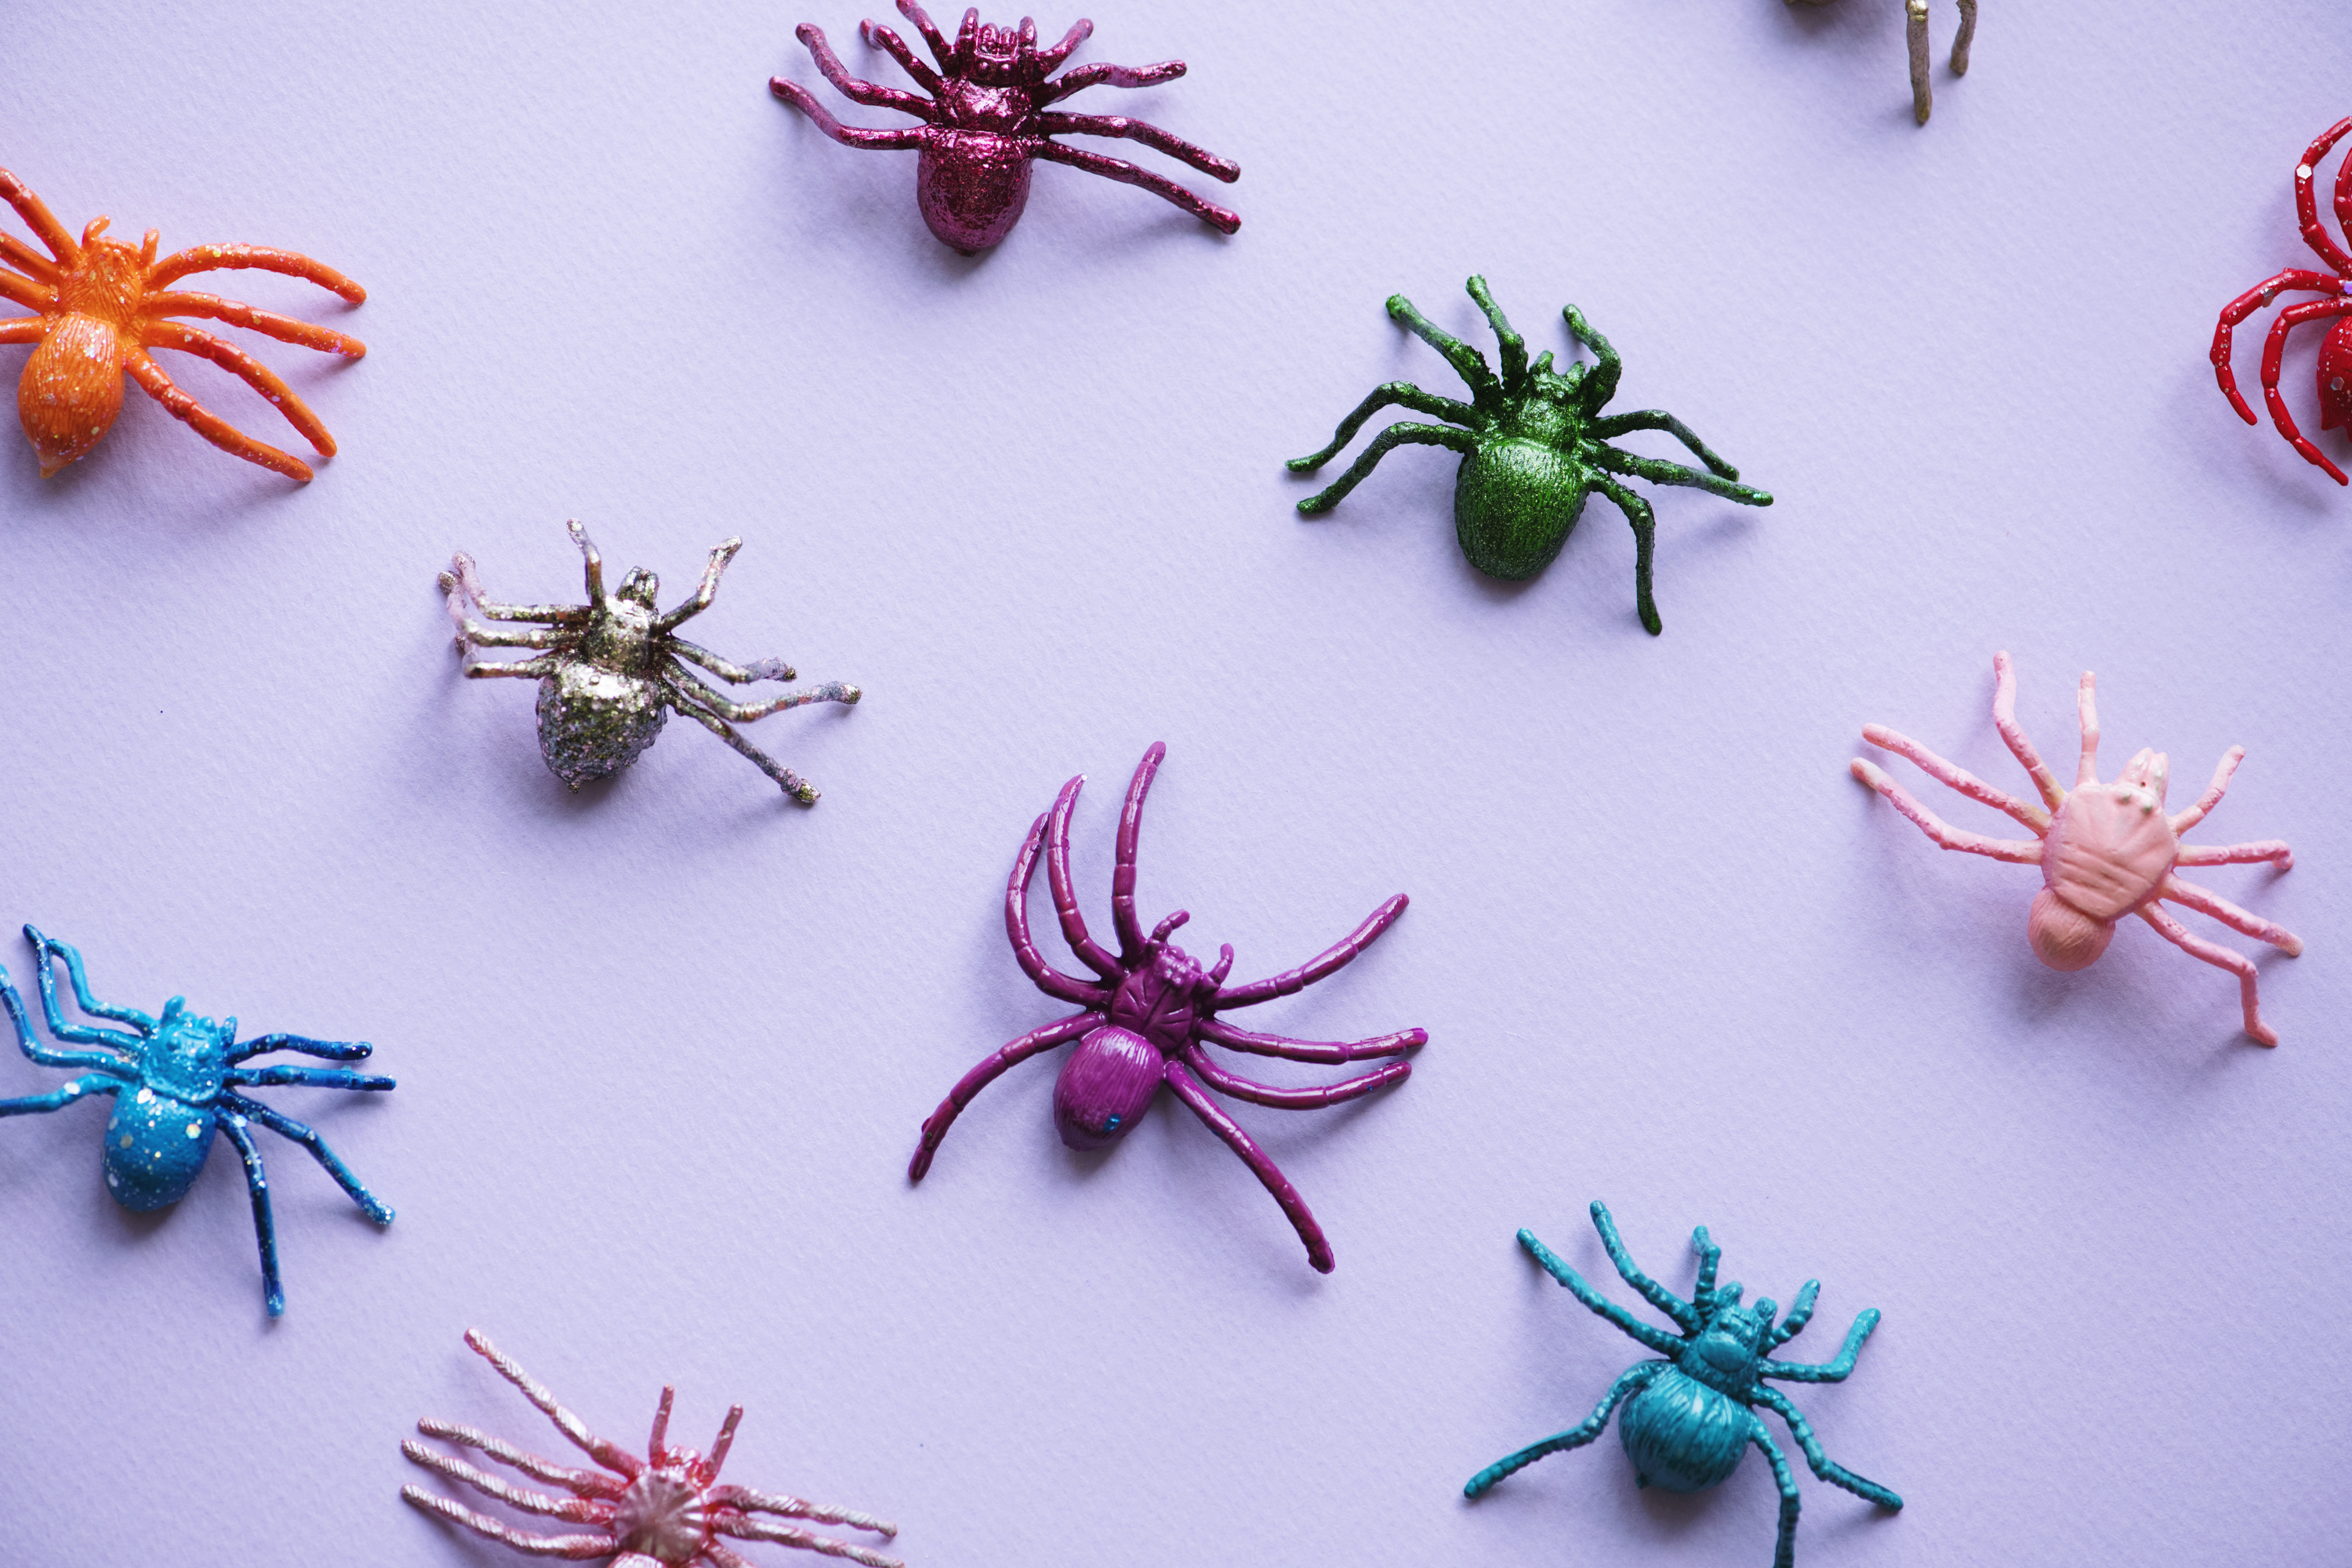 Cute little spiders on a paper